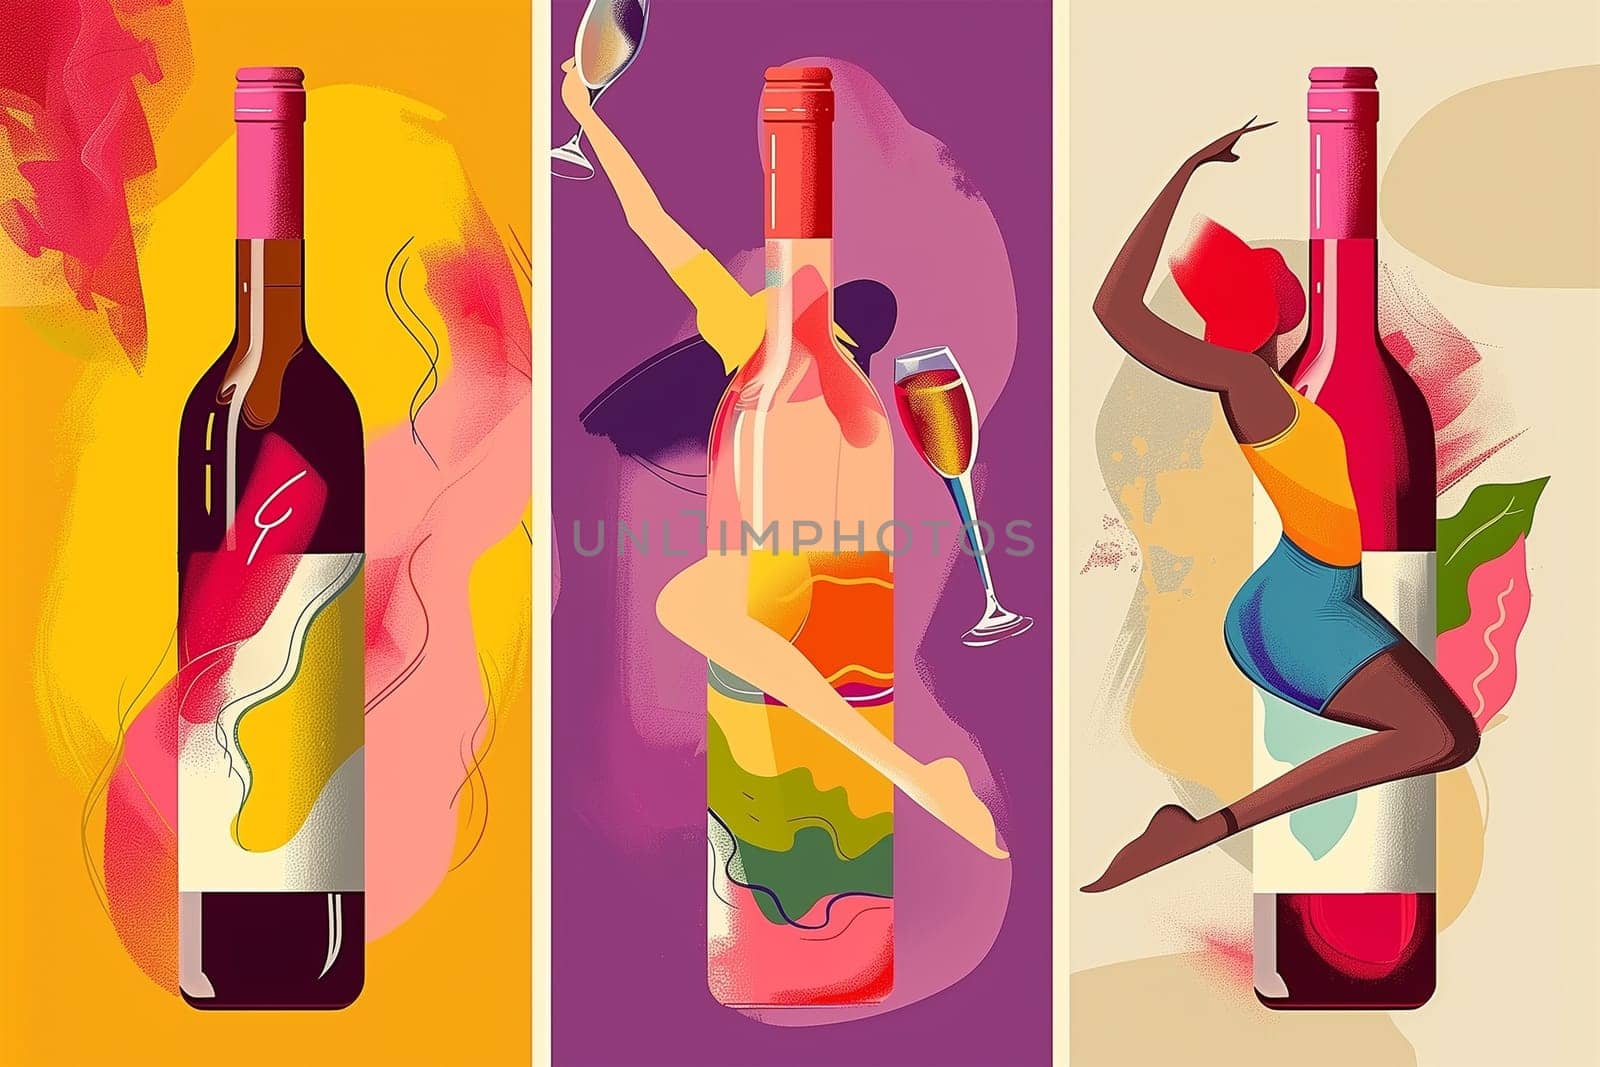 Colorful Illustrations of Wine Bottles and Woman Dancing by Sd28DimoN_1976